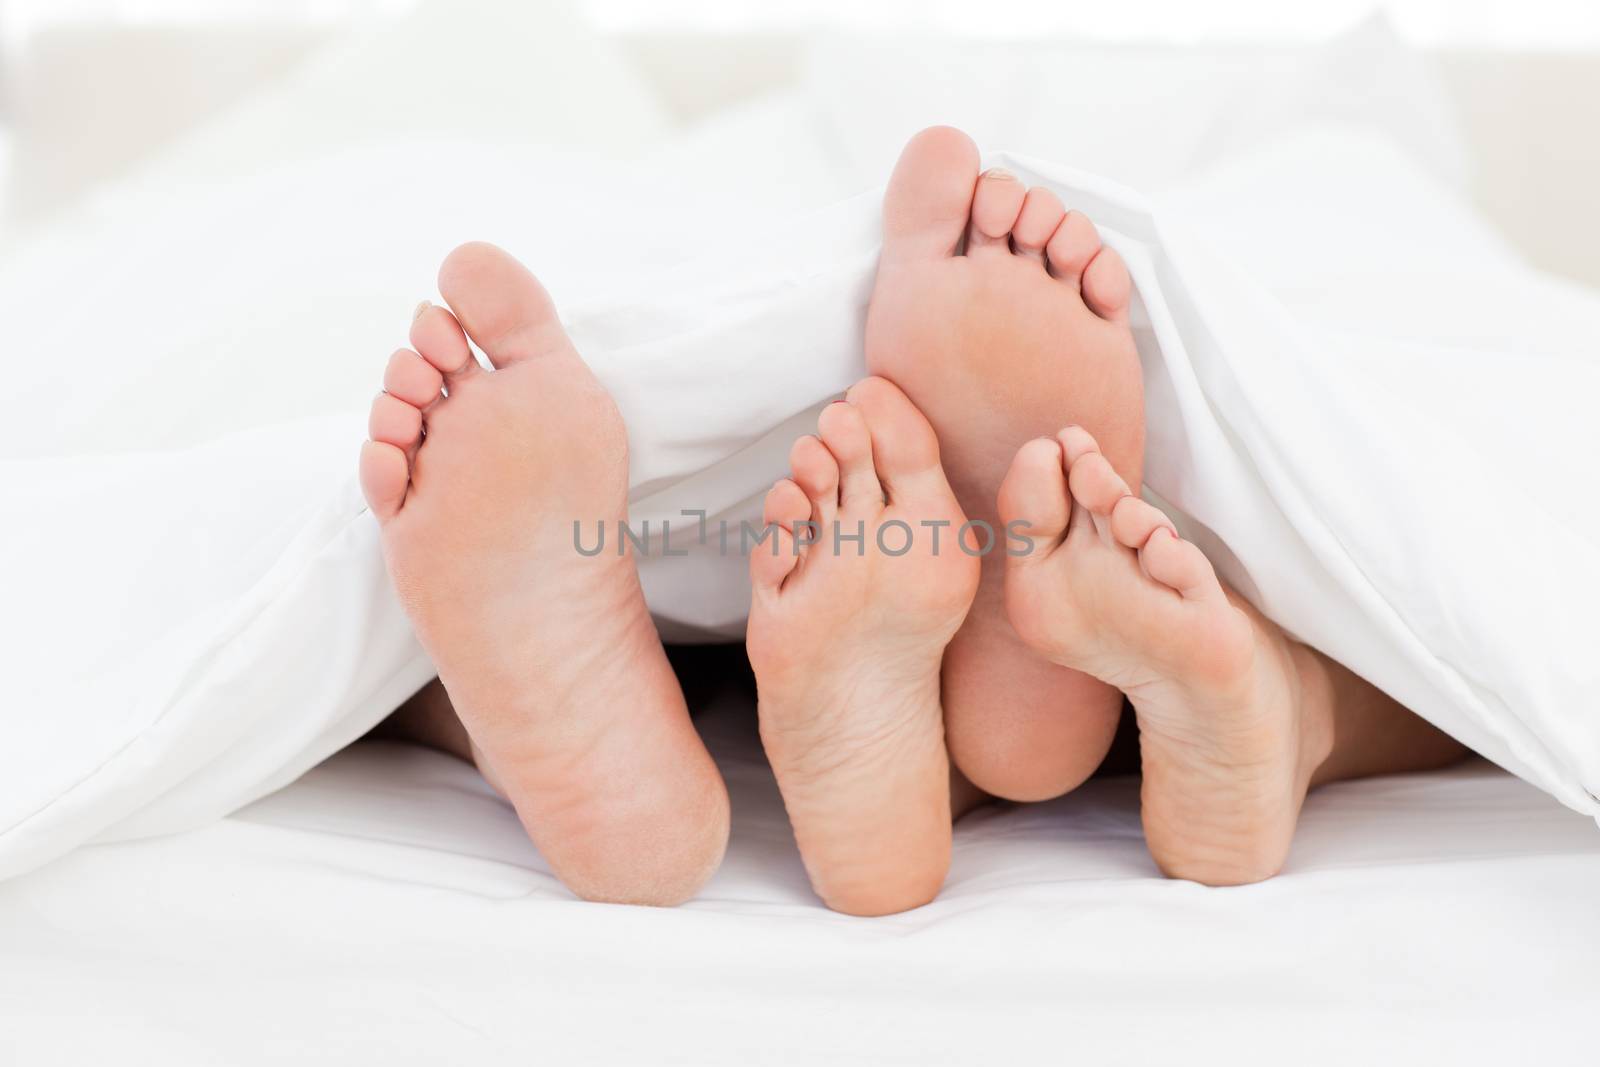 Two members of a family showing their feet while lying on a bed by Wavebreakmedia